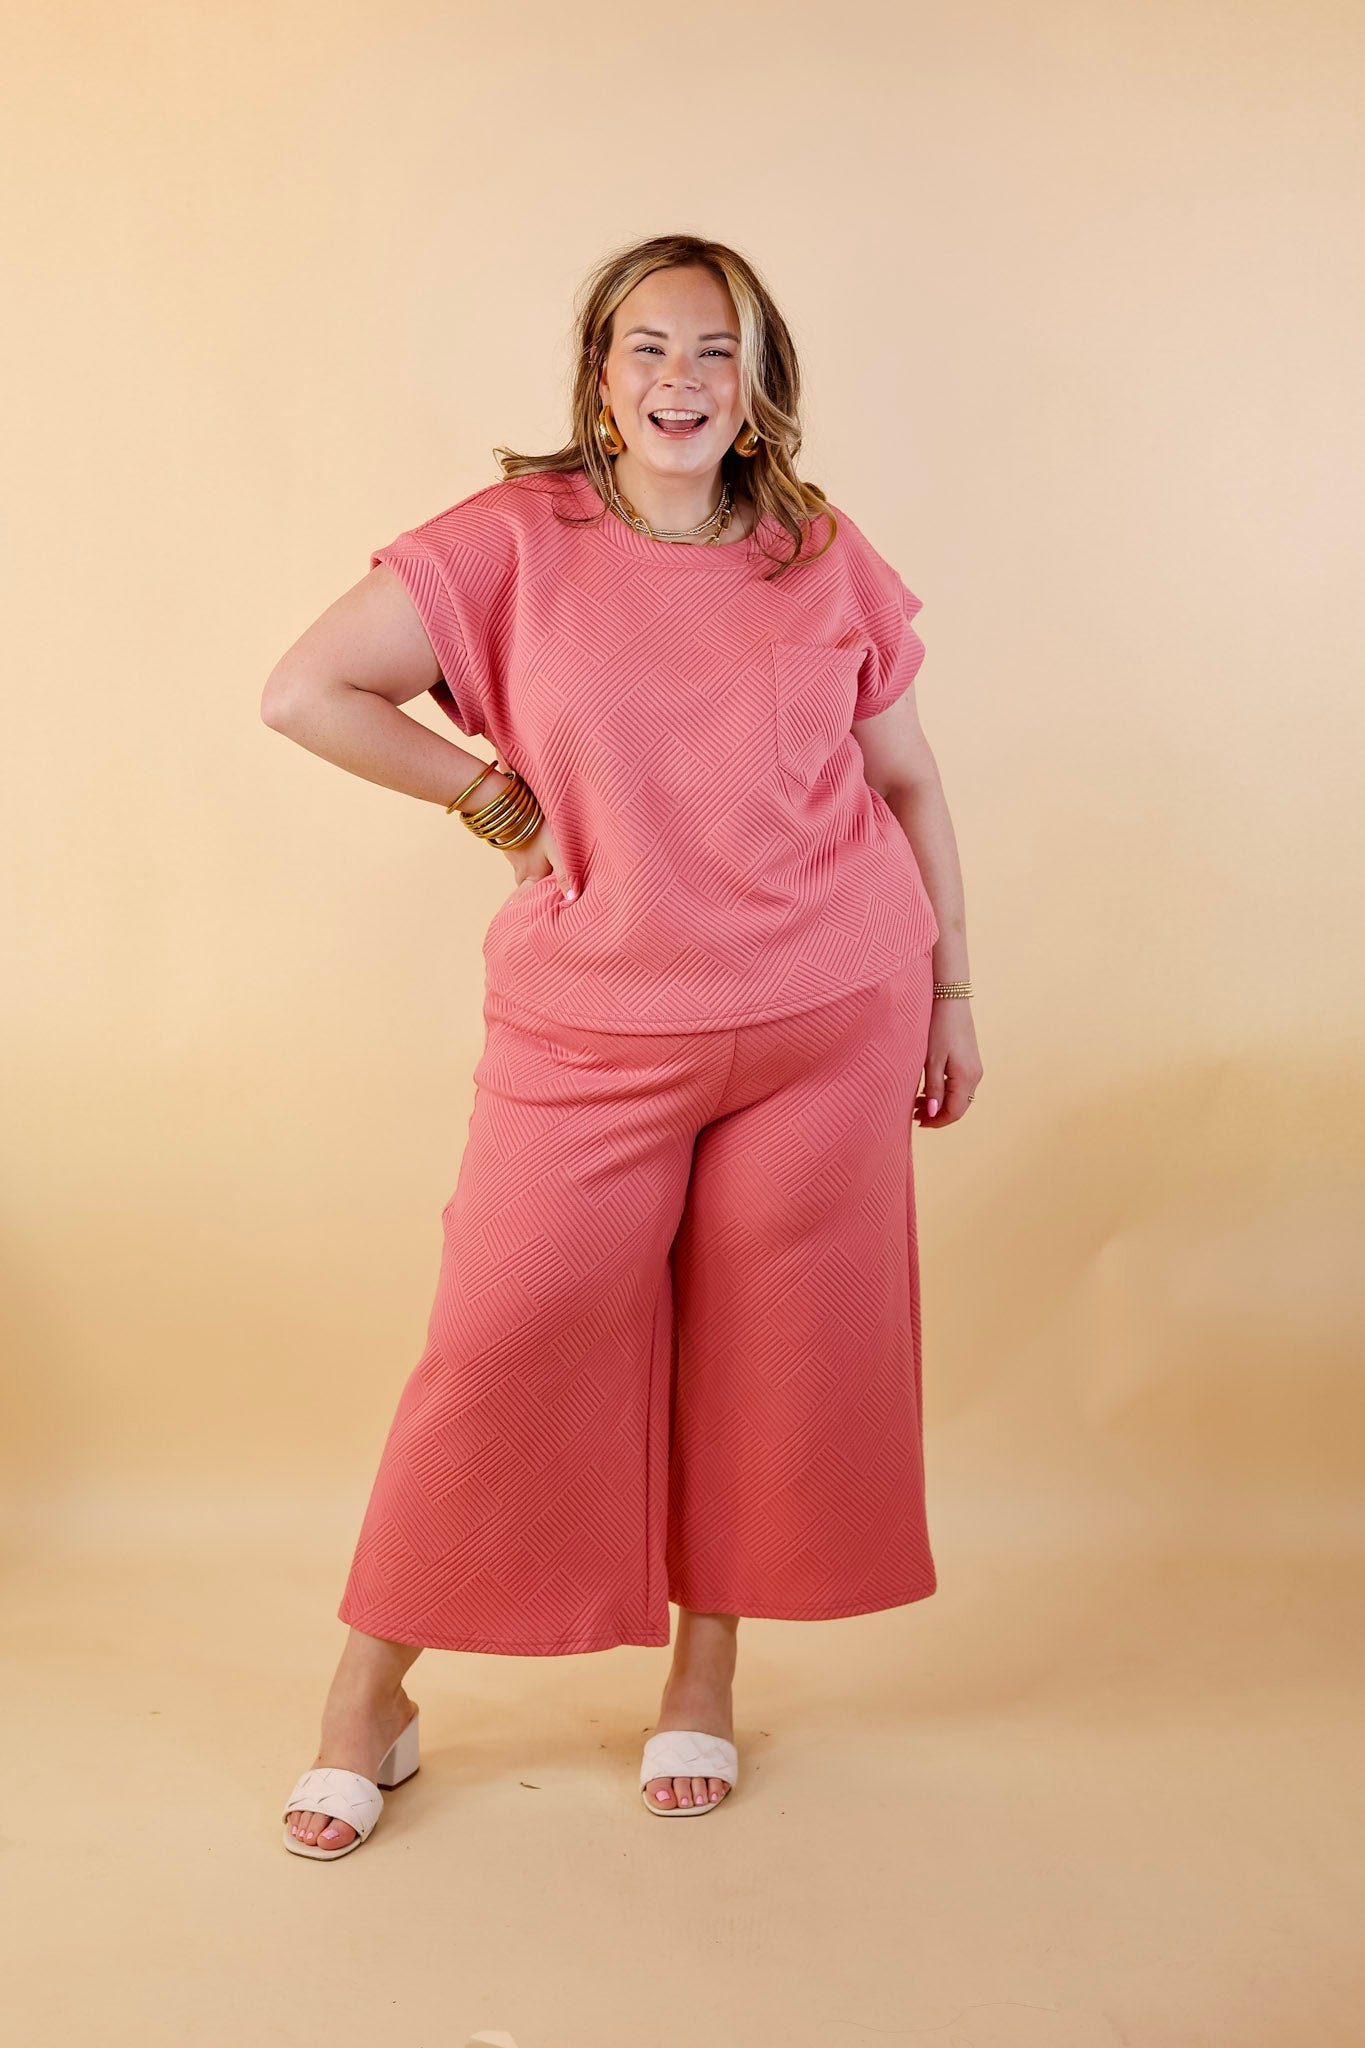 Glamour on the Go Textured Top with Pocket in Coral - Giddy Up Glamour Boutique